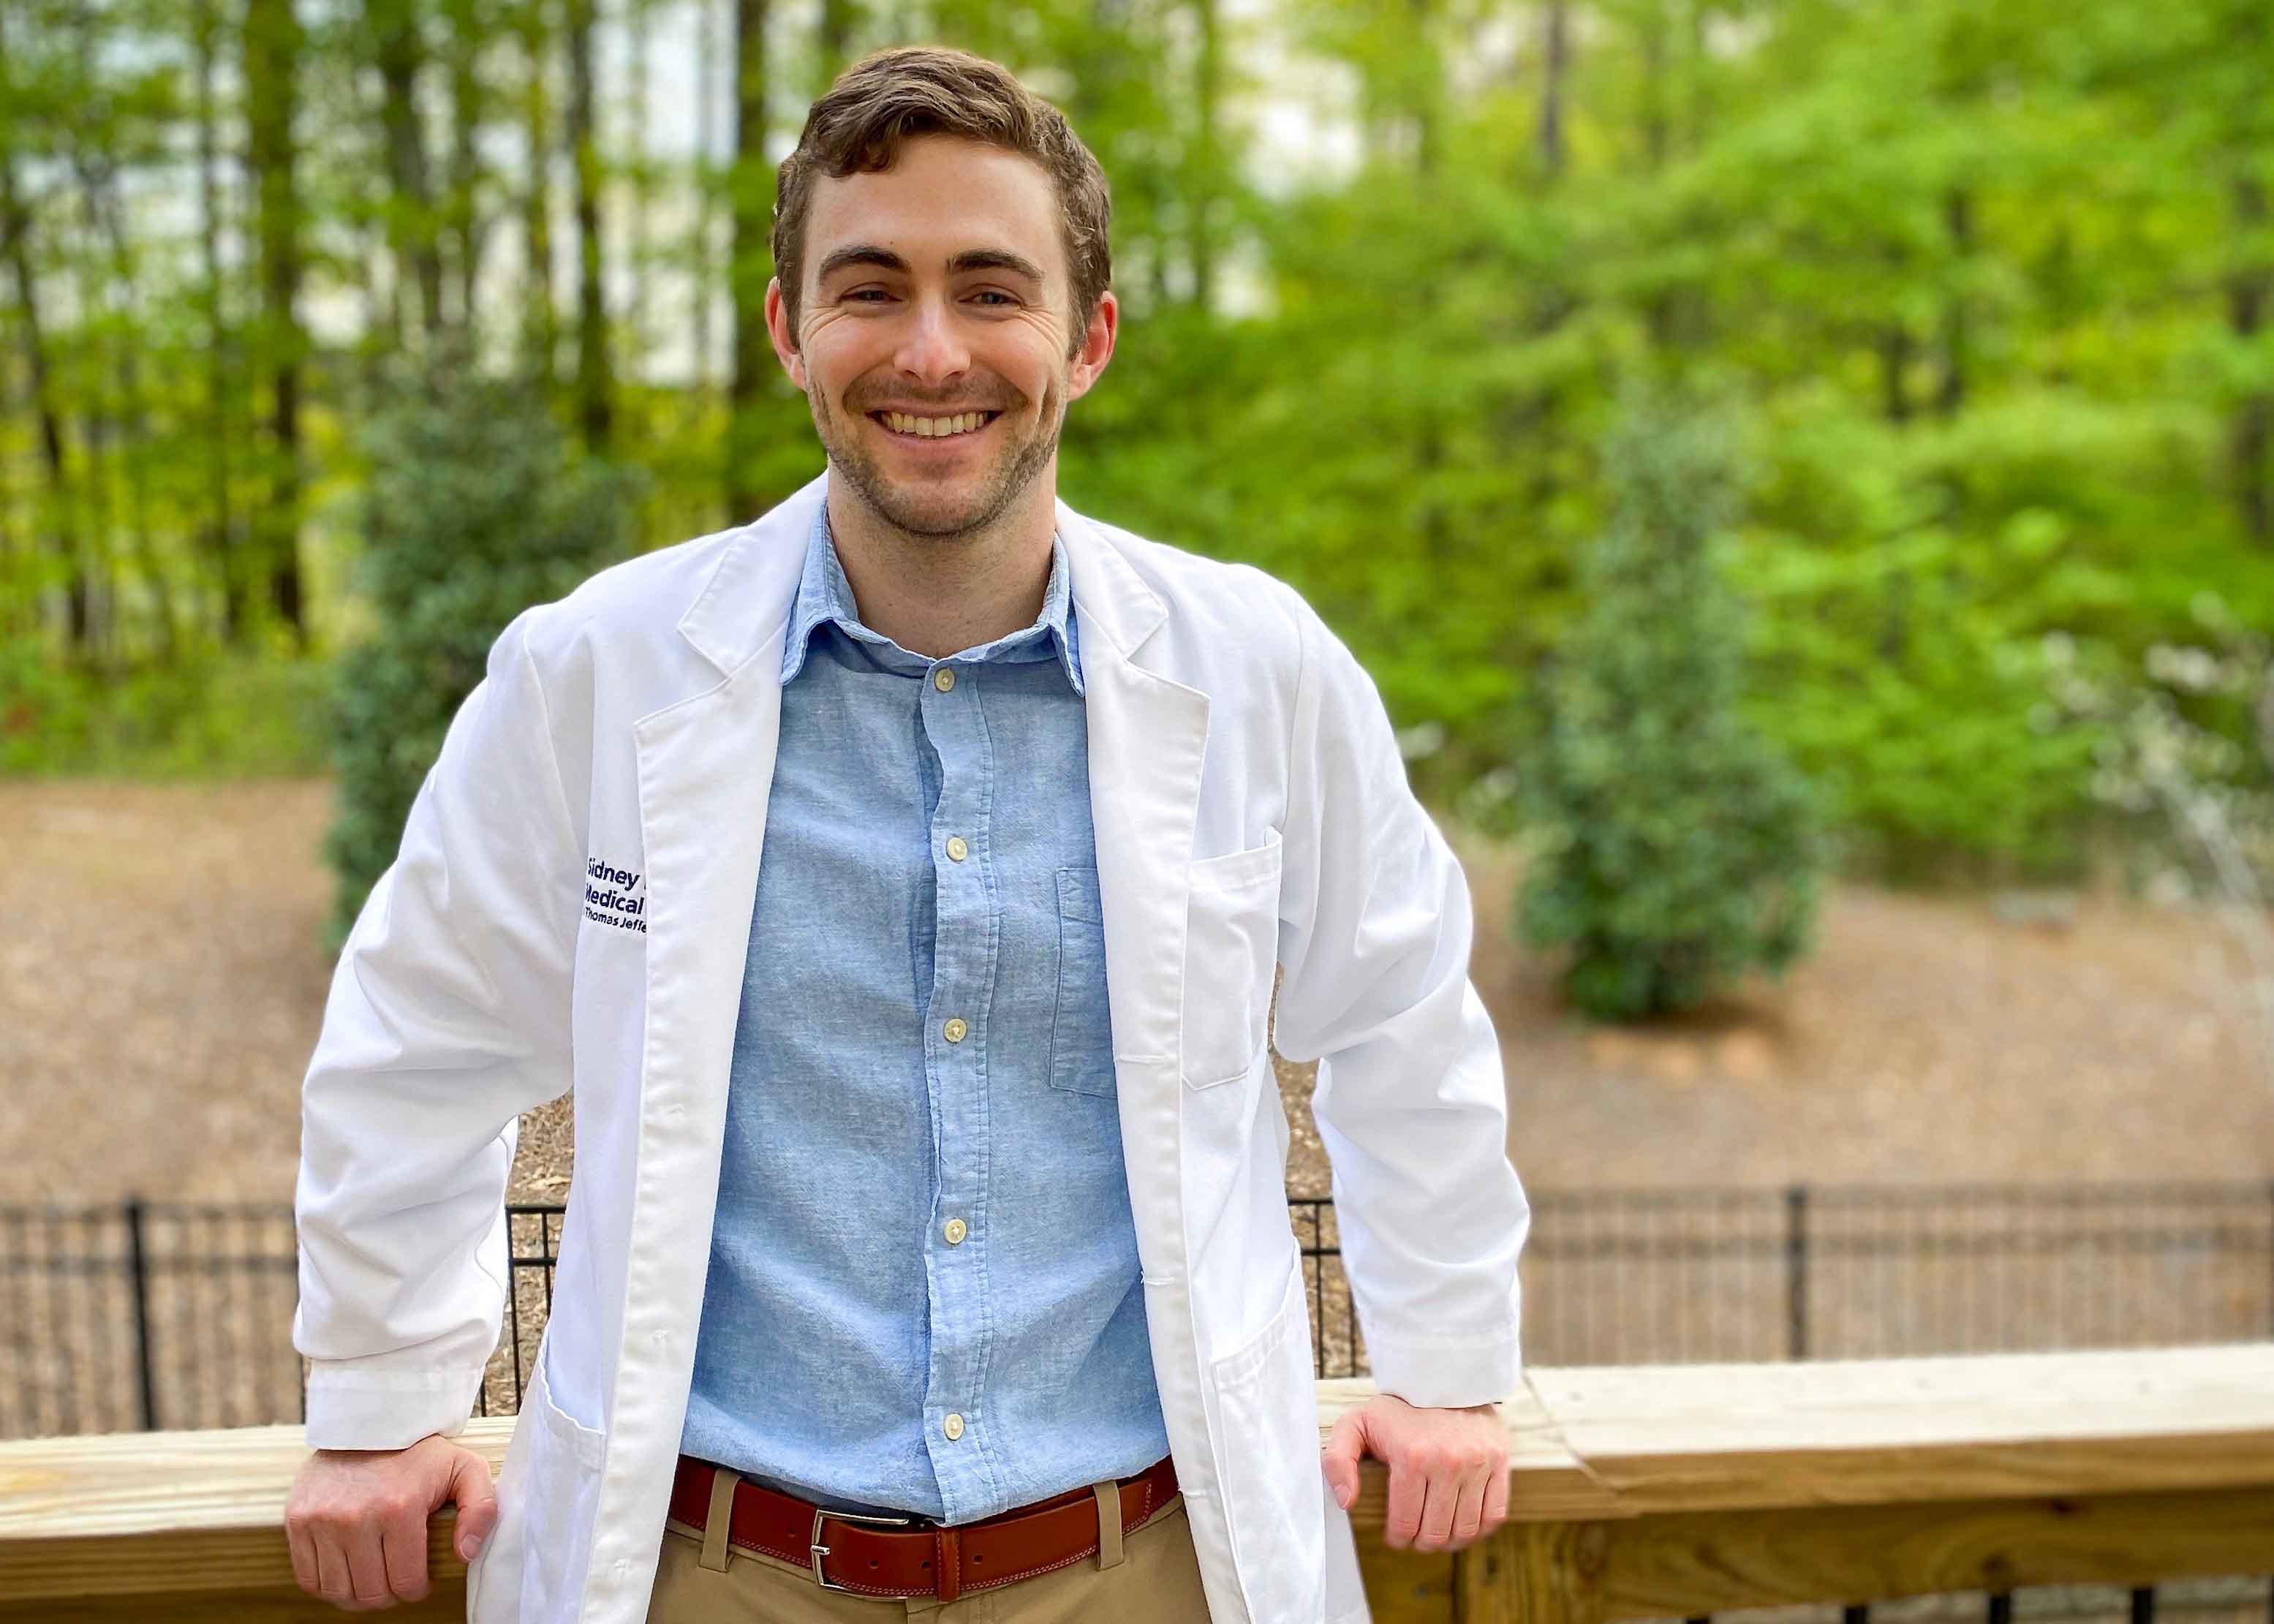 UGA alumnus and current fourth-year medical student Jake Goodman has been sharing stories about his path to medical school on social media after realizing that the challenges he's faced resonate with many students. He now has over 210,000 followers on TikTok. (contributed photo)